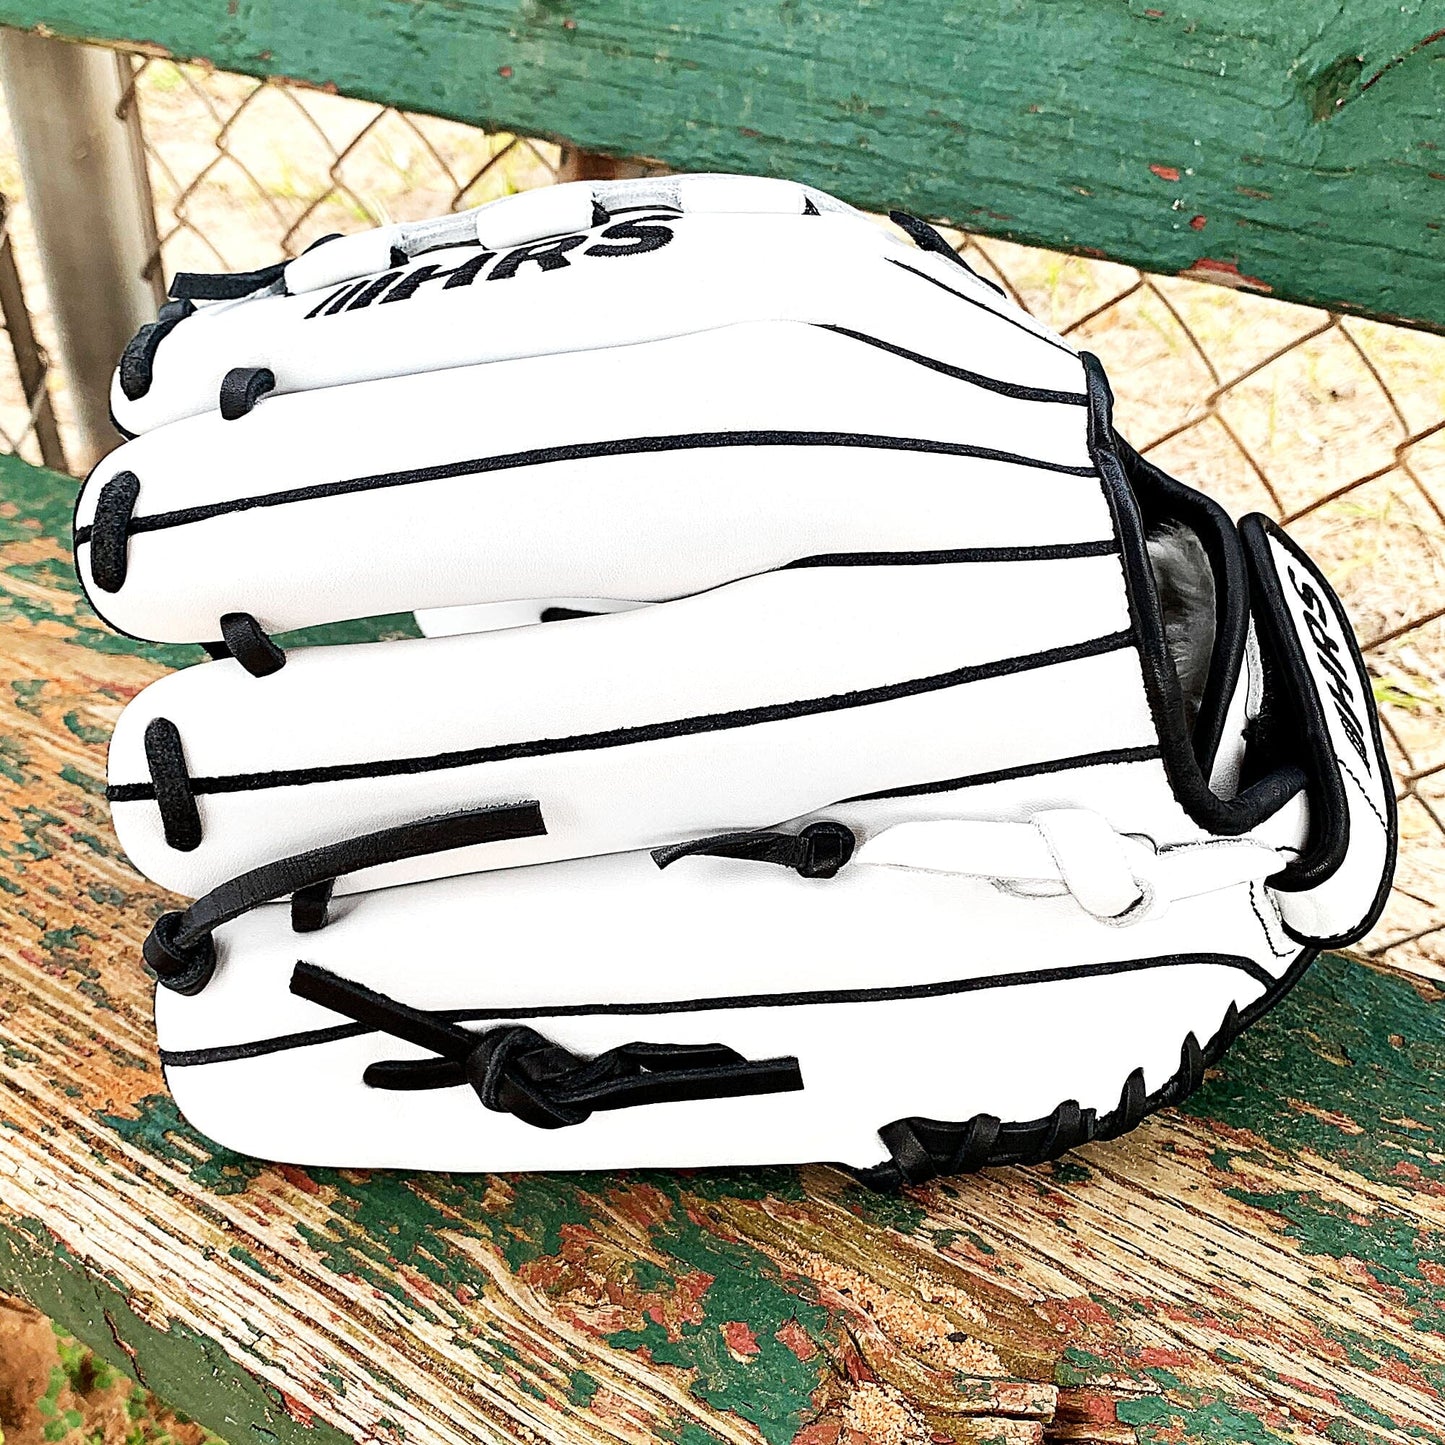 12" White with Black Laces - Grid and Net Web